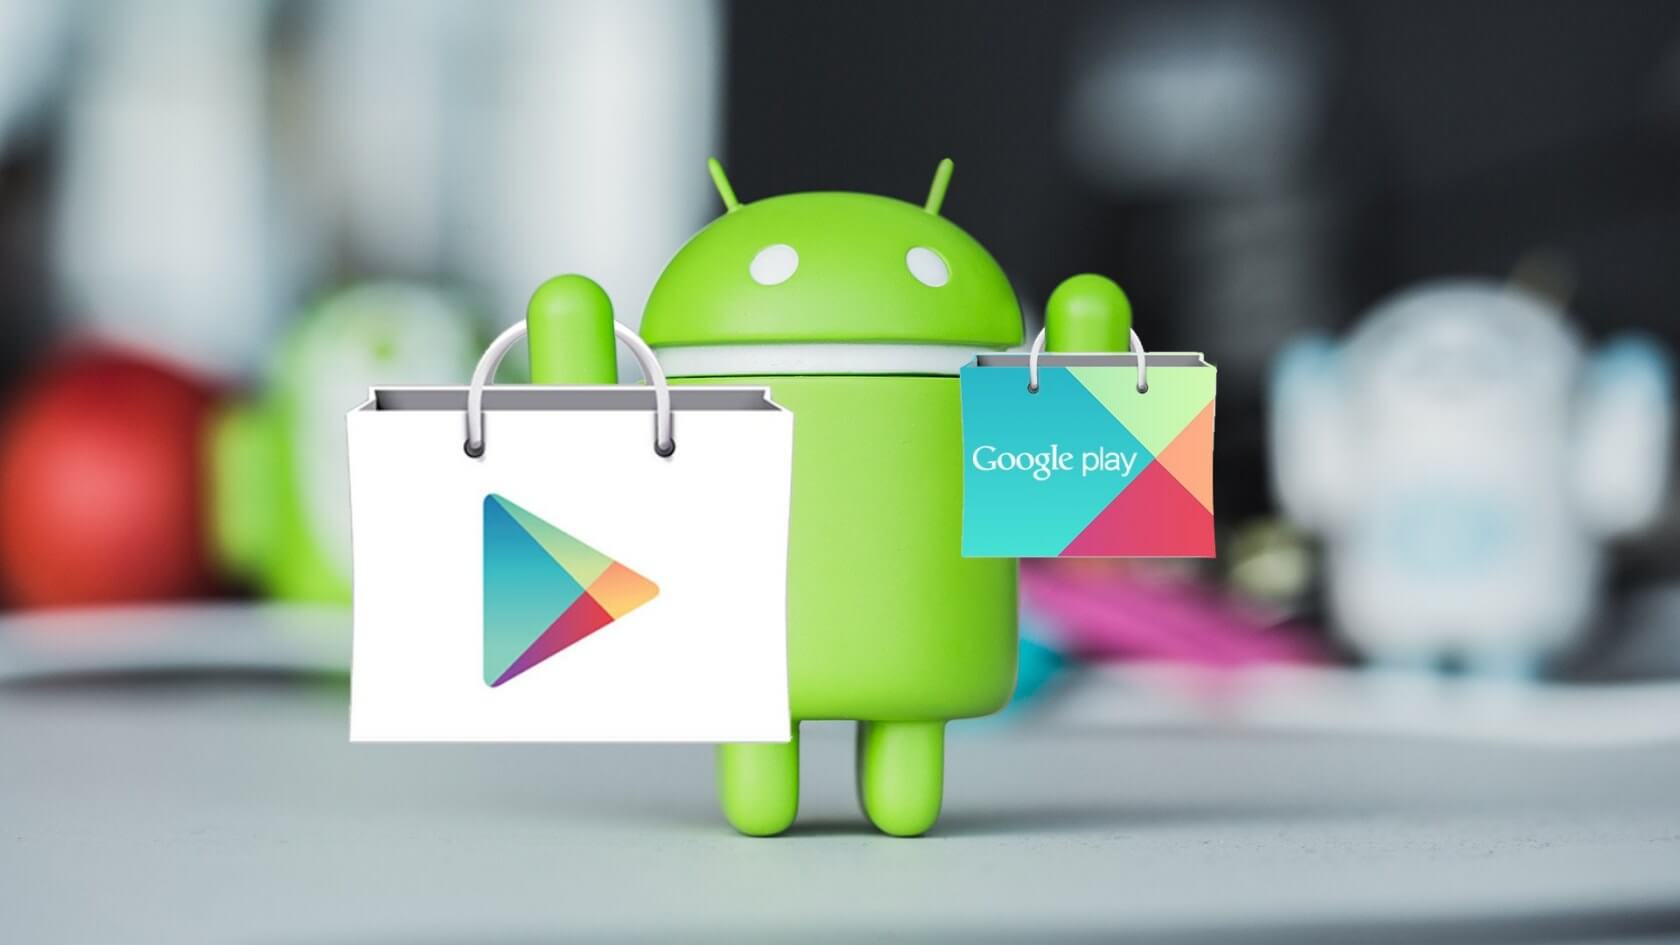 Google Play Store Malicious Apps